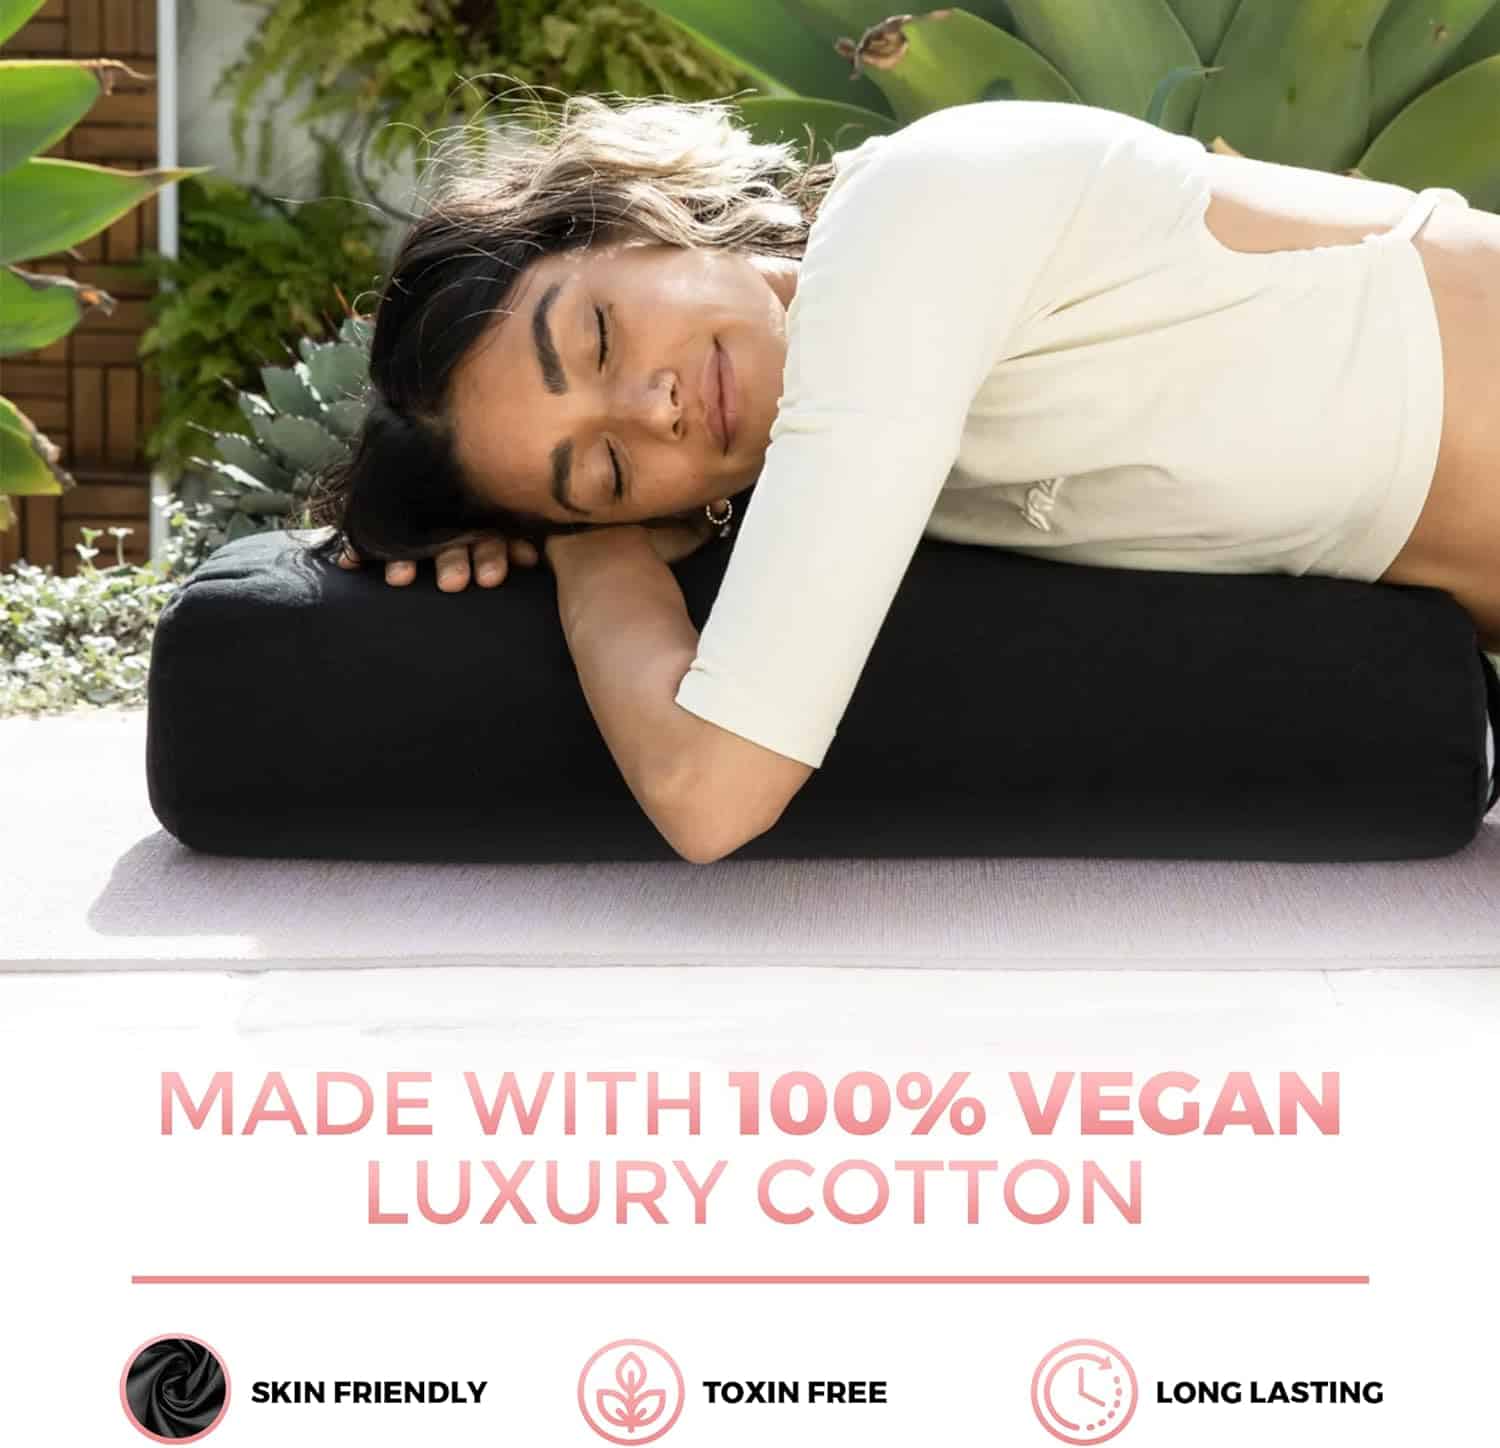 AJNA Yoga Bolster Pillow: A Luxurious Addition to Your Yoga Practice - A Comprehensive Review